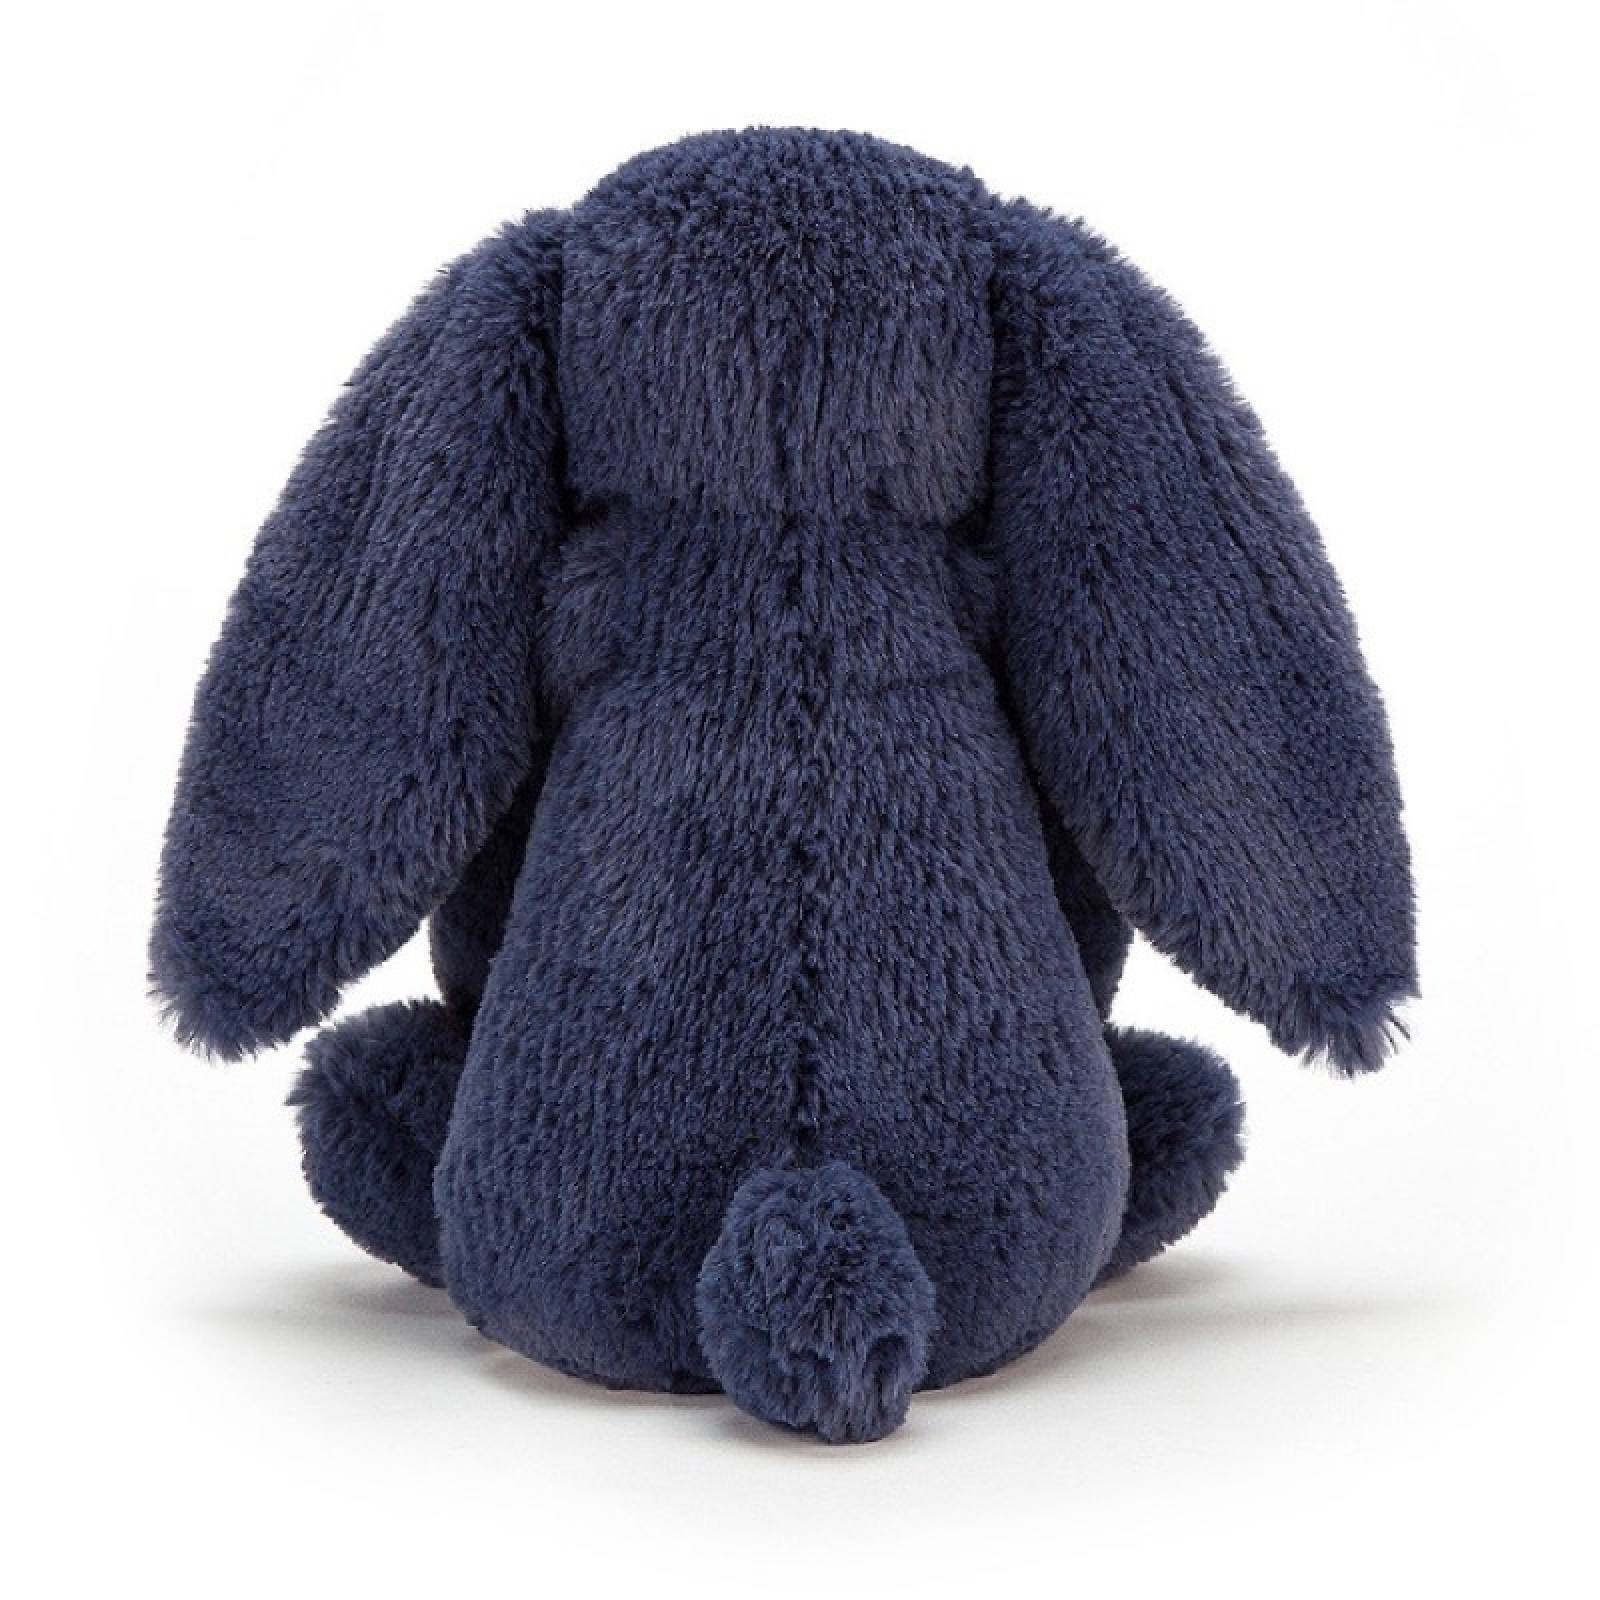 Small Bashful Bunny In Navy Soft Toy By Jellycat thumbnails